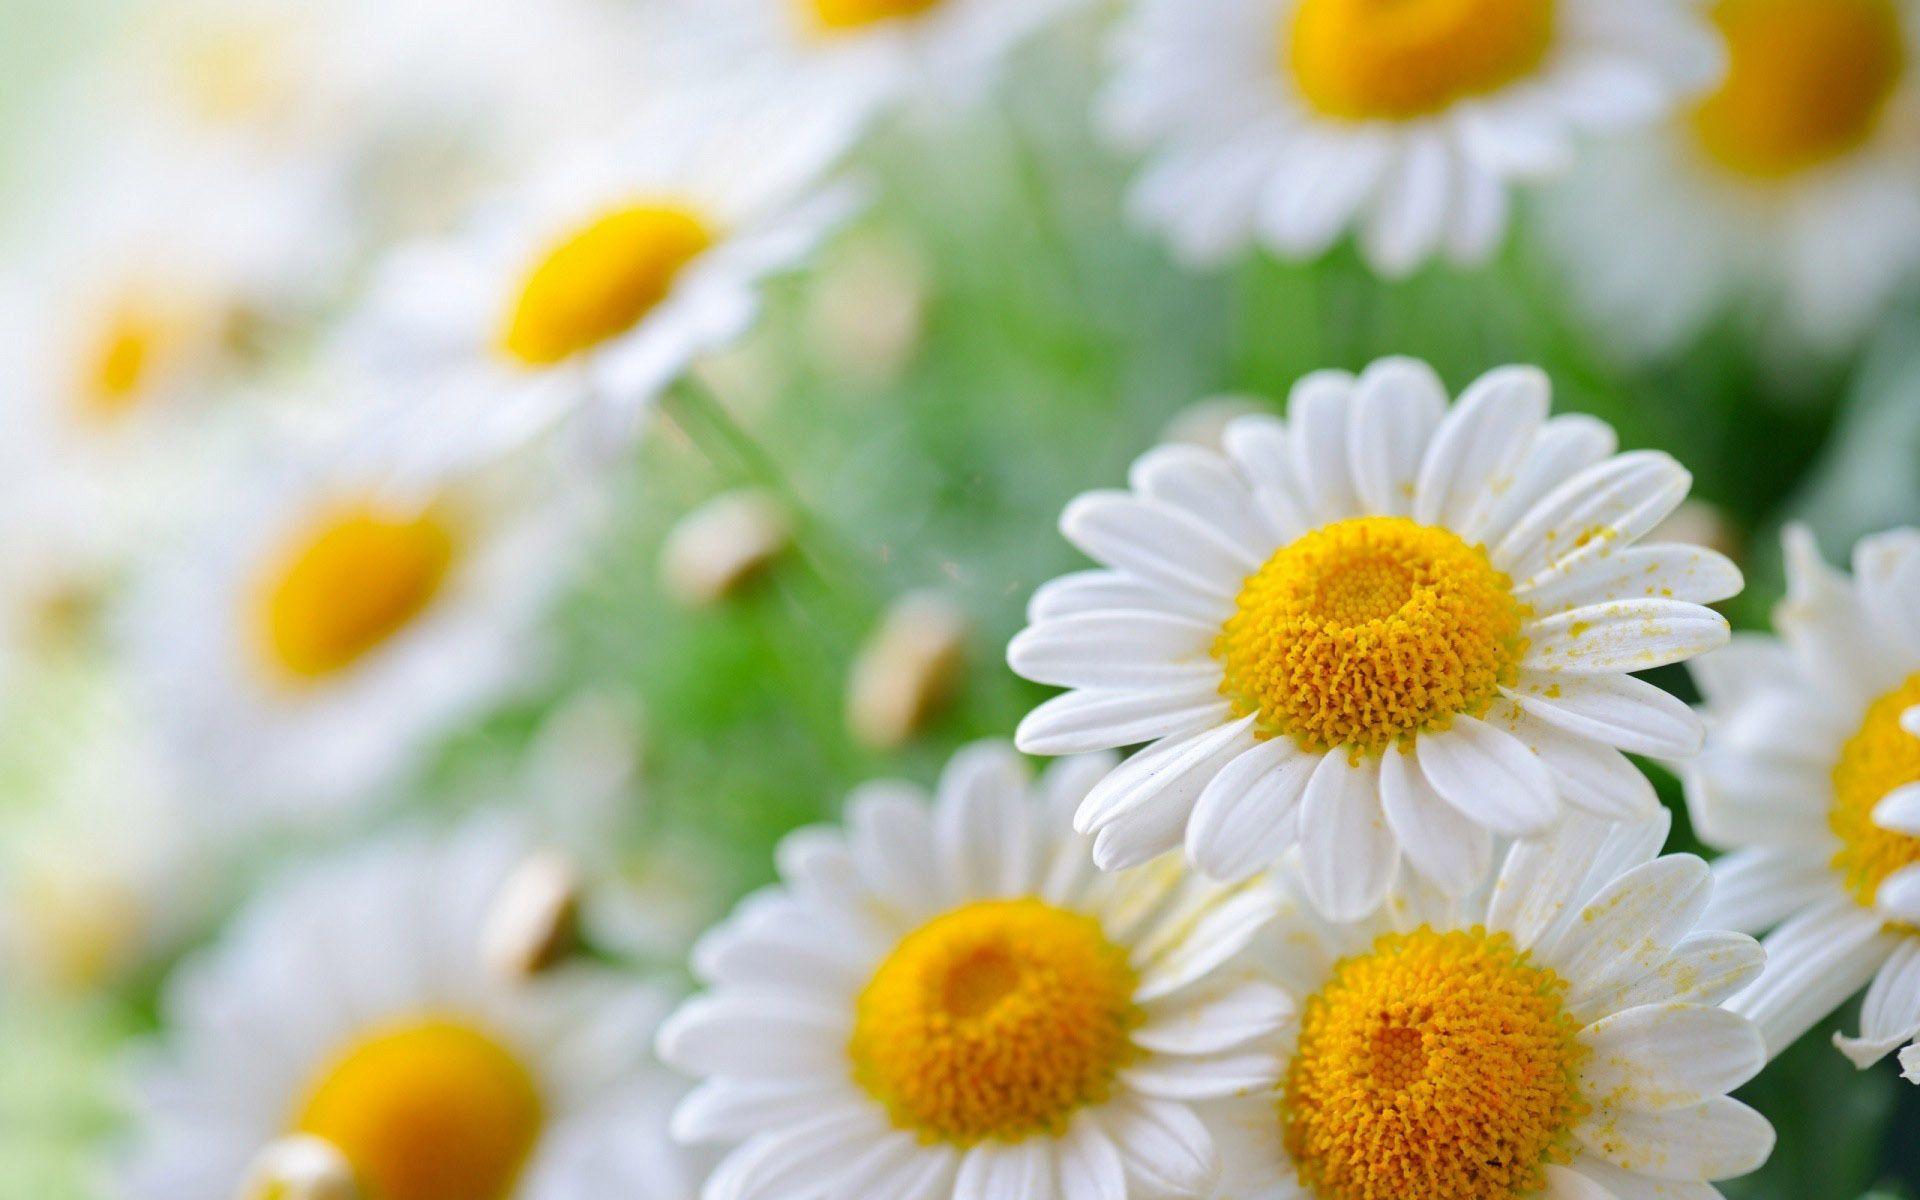 Daisies HD Wallpaper Background For Free Download, BsnSCB Gallery